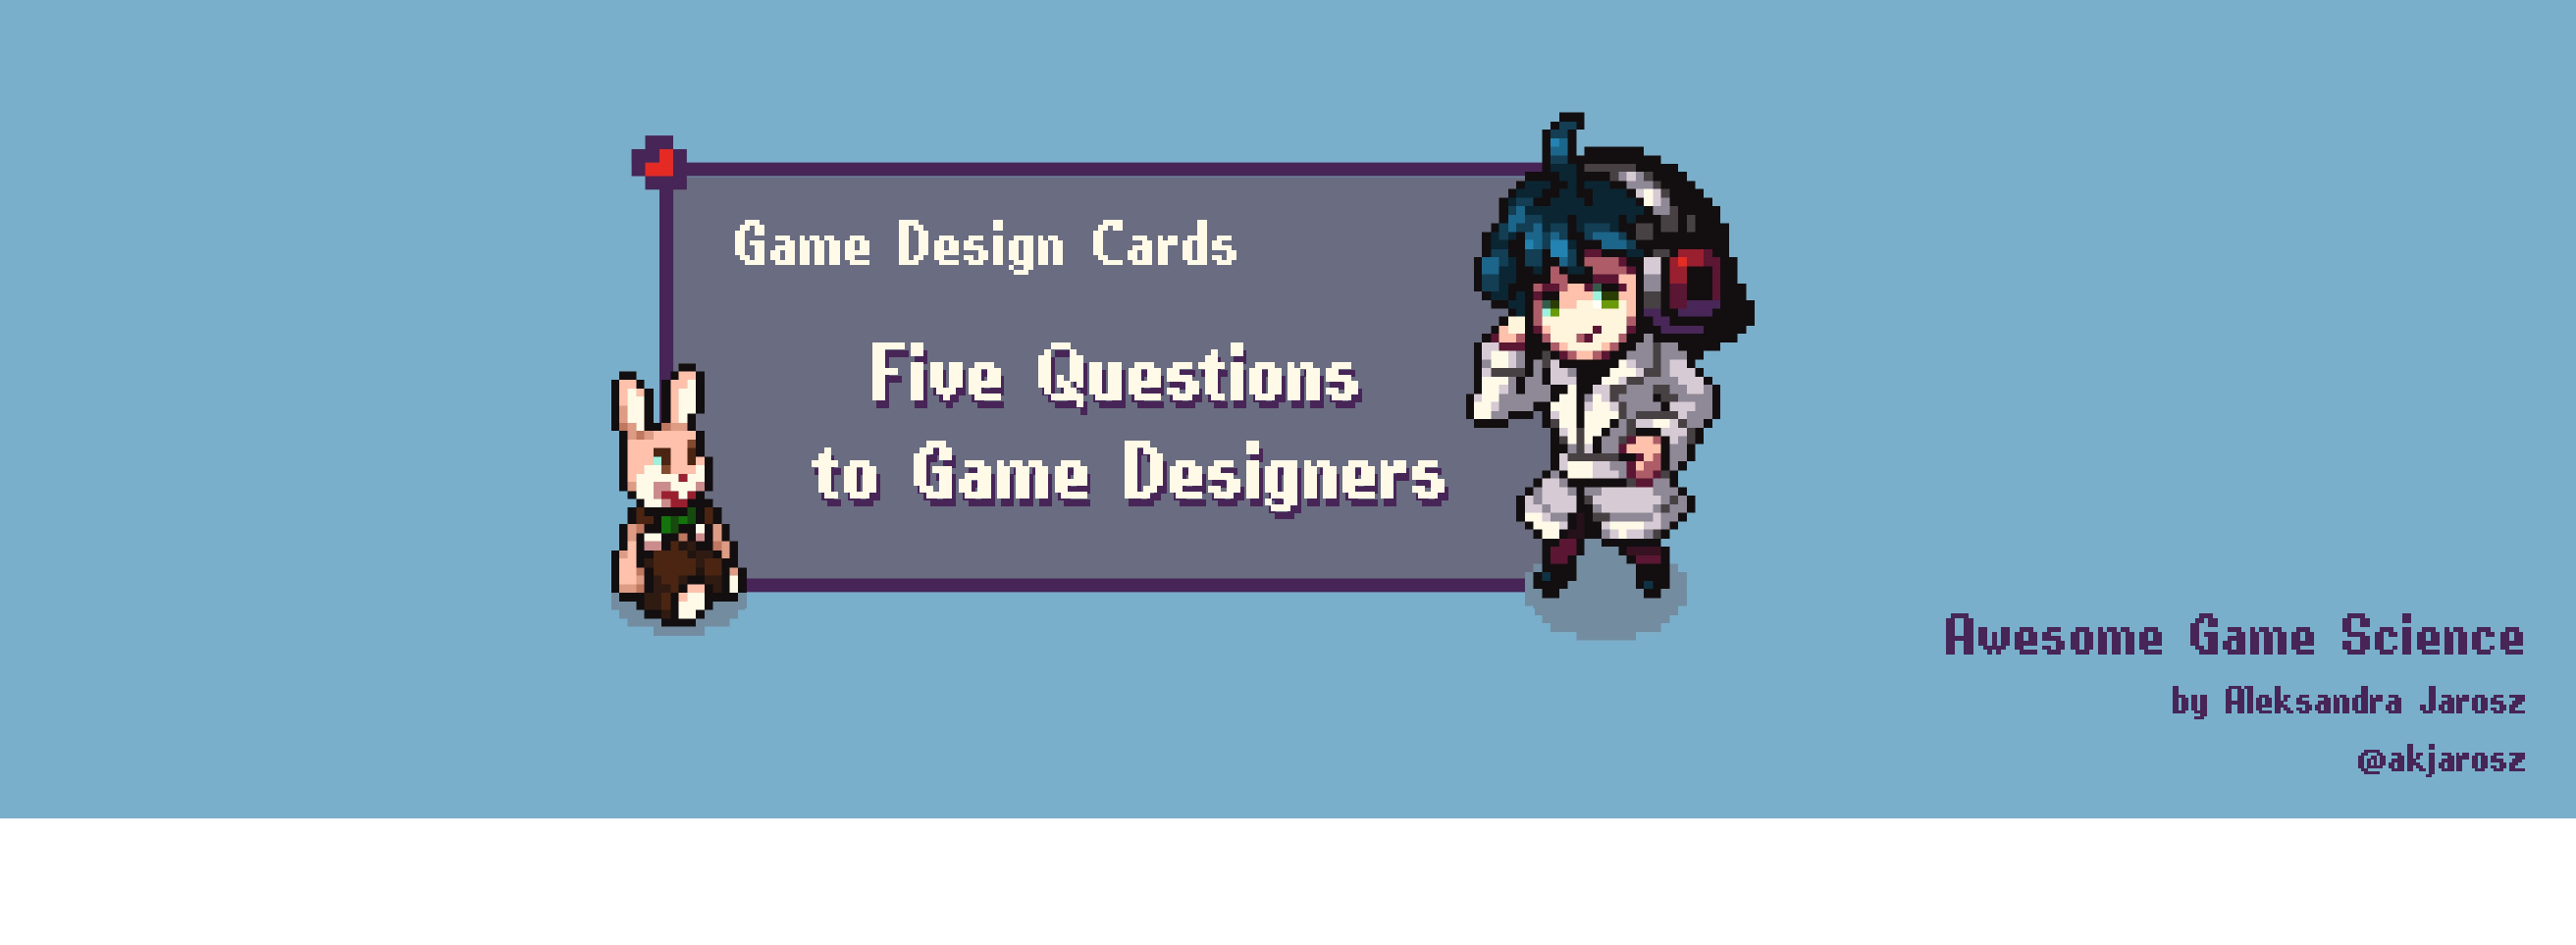 Five Questions to Awesome Game Designers